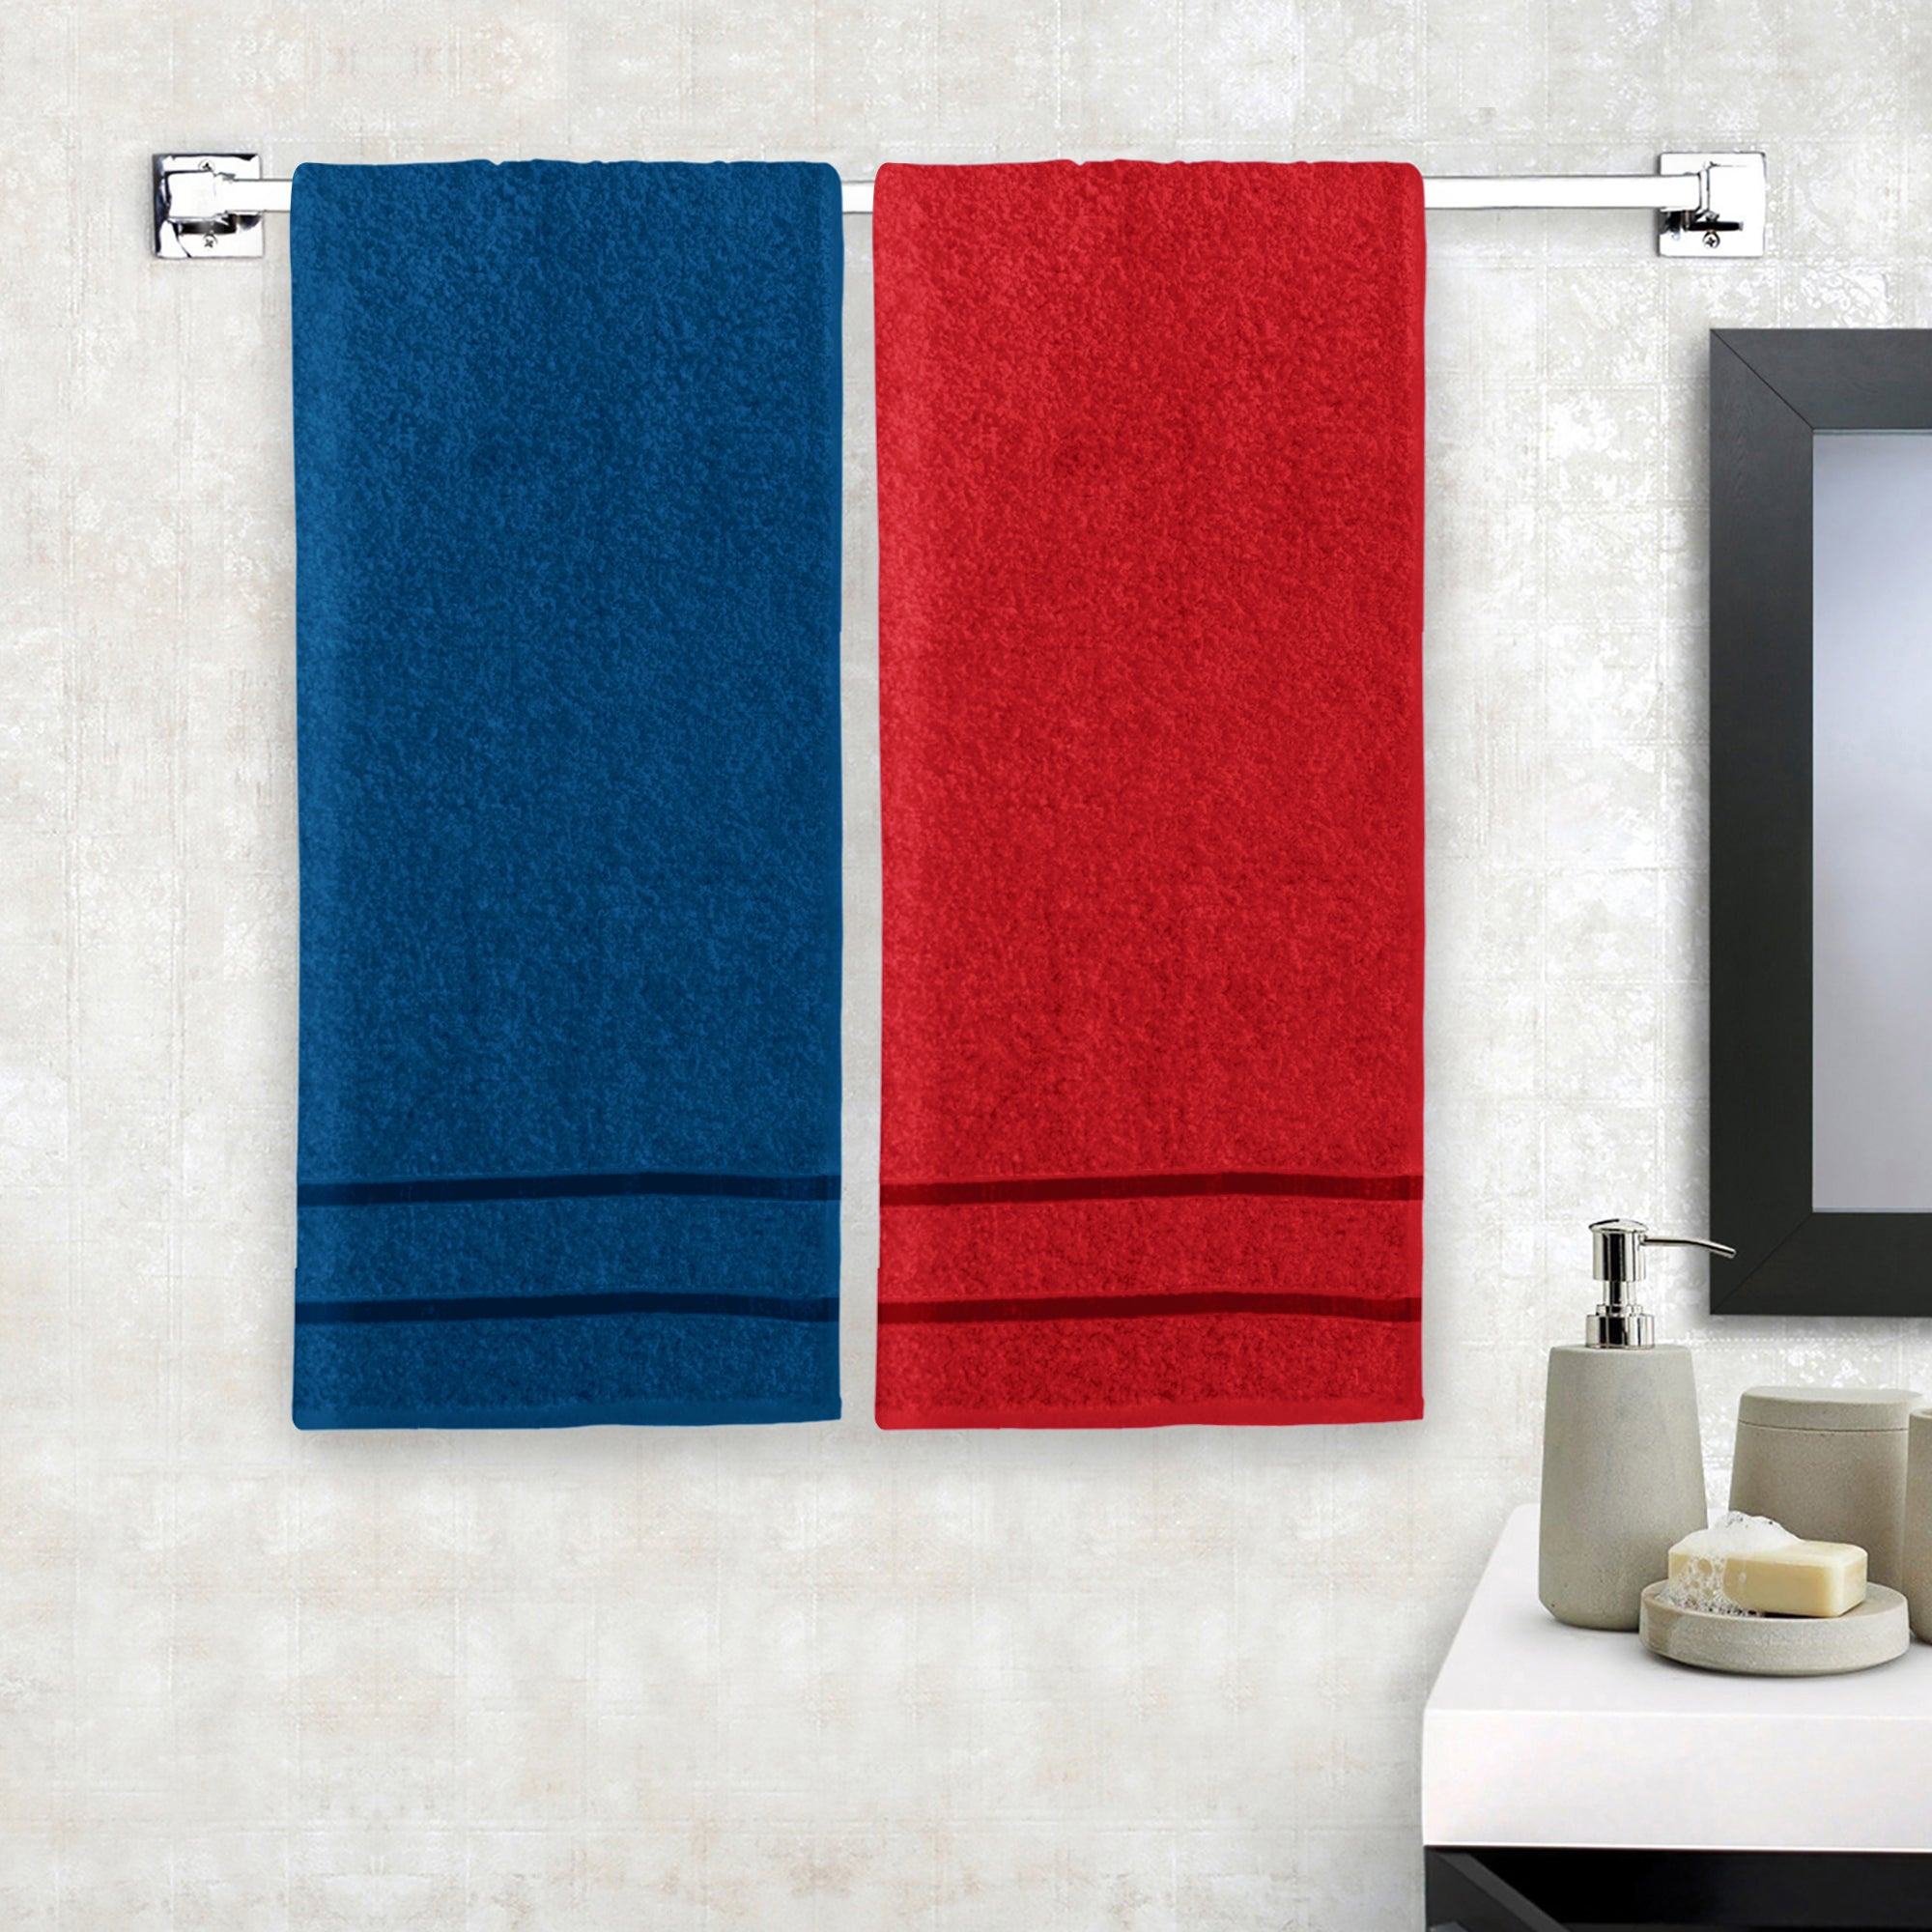 Story@Home 2 Units 100% Cotton Ladies Bath Towels - Navy and Wine Red